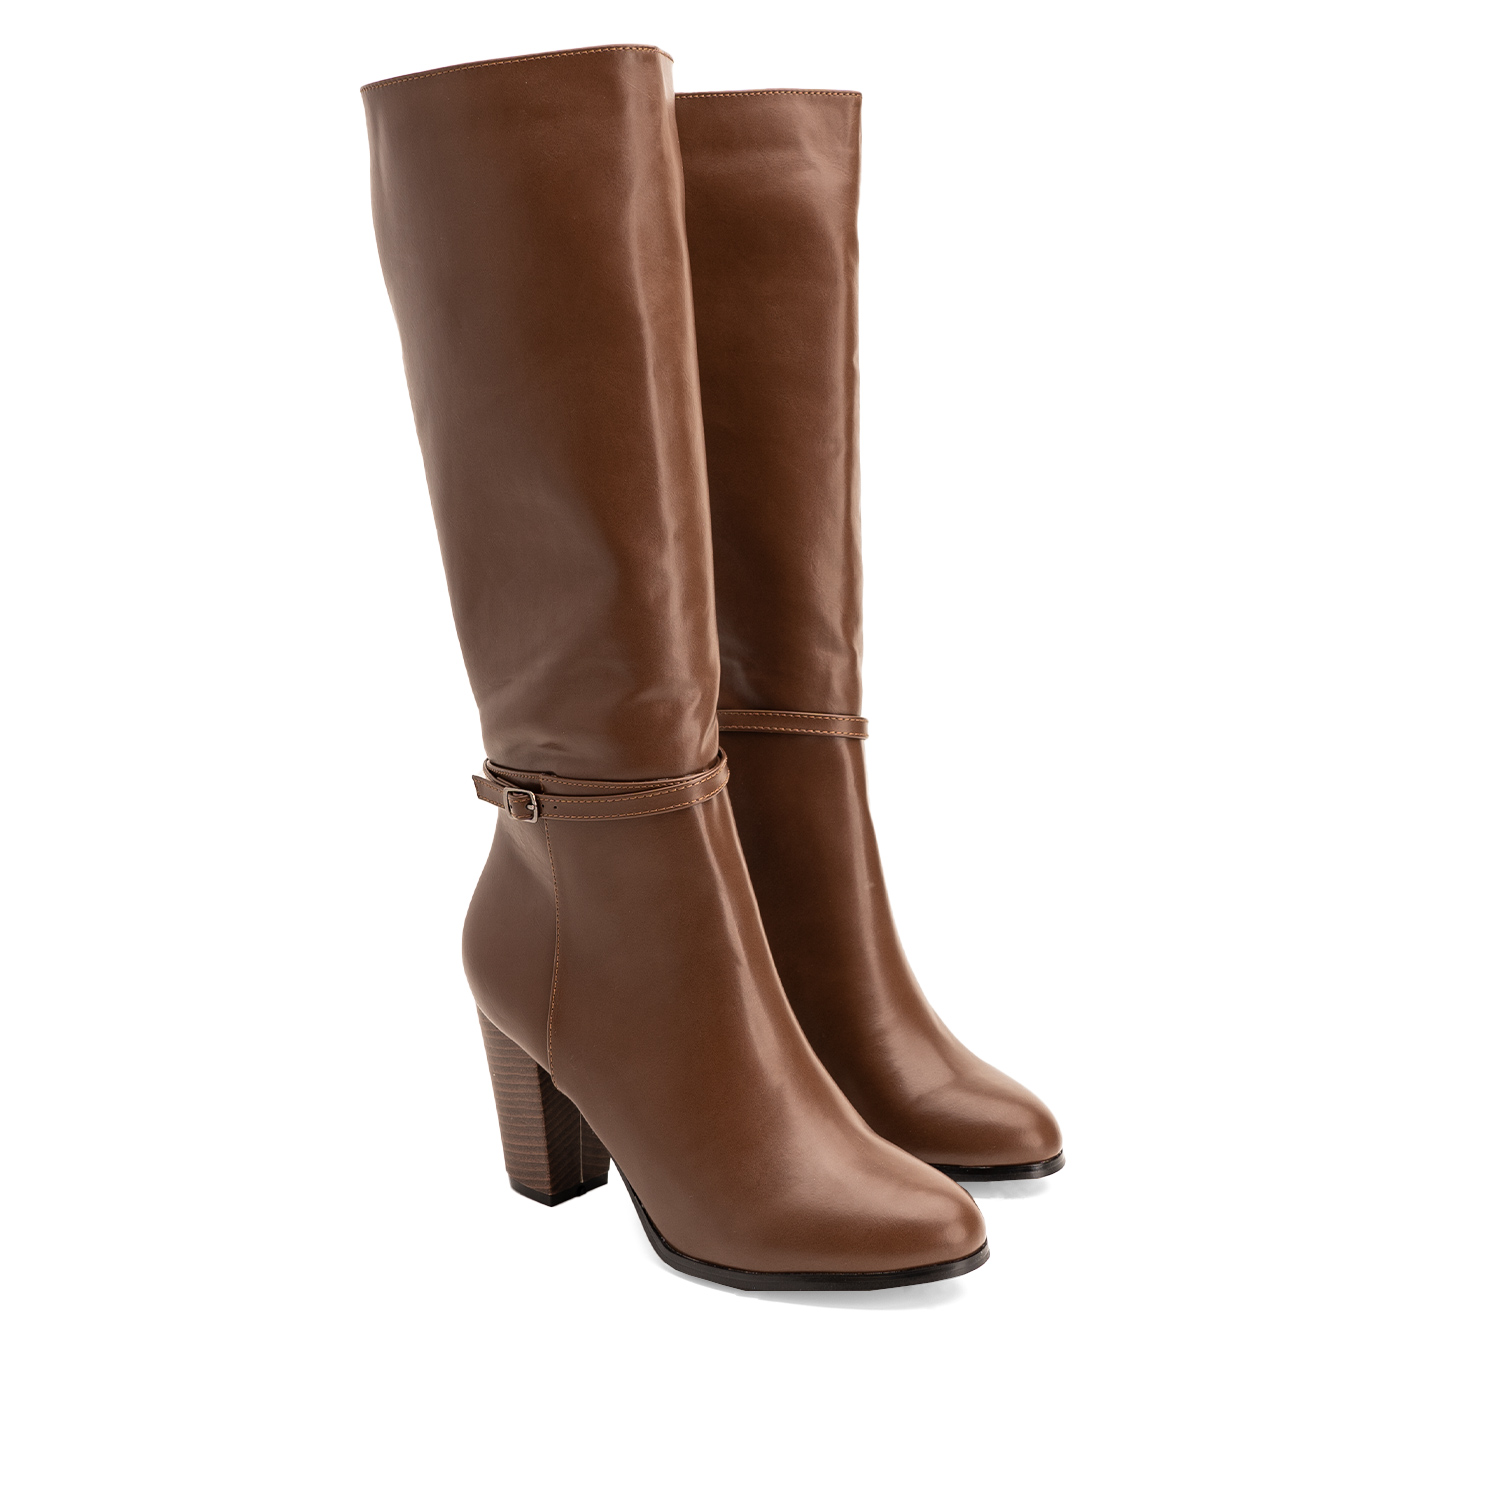 Heeled boots in brown faux leather with buckled strap detail 